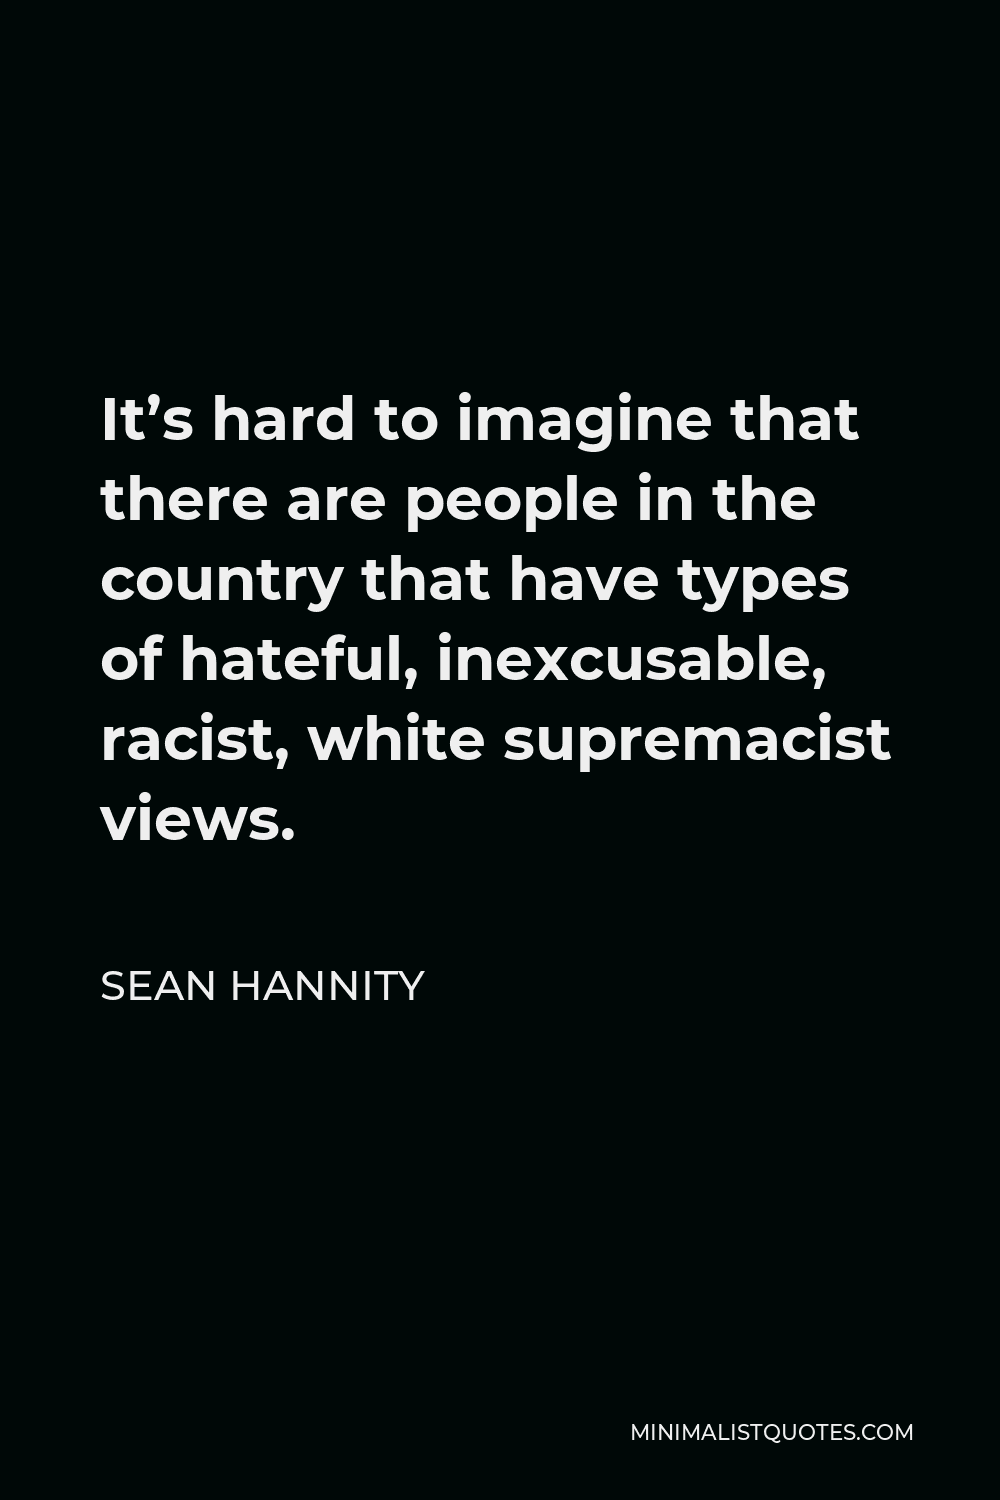 Sean Hannity Quote - It’s hard to imagine that there are people in the country that have types of hateful, inexcusable, racist, white supremacist views.